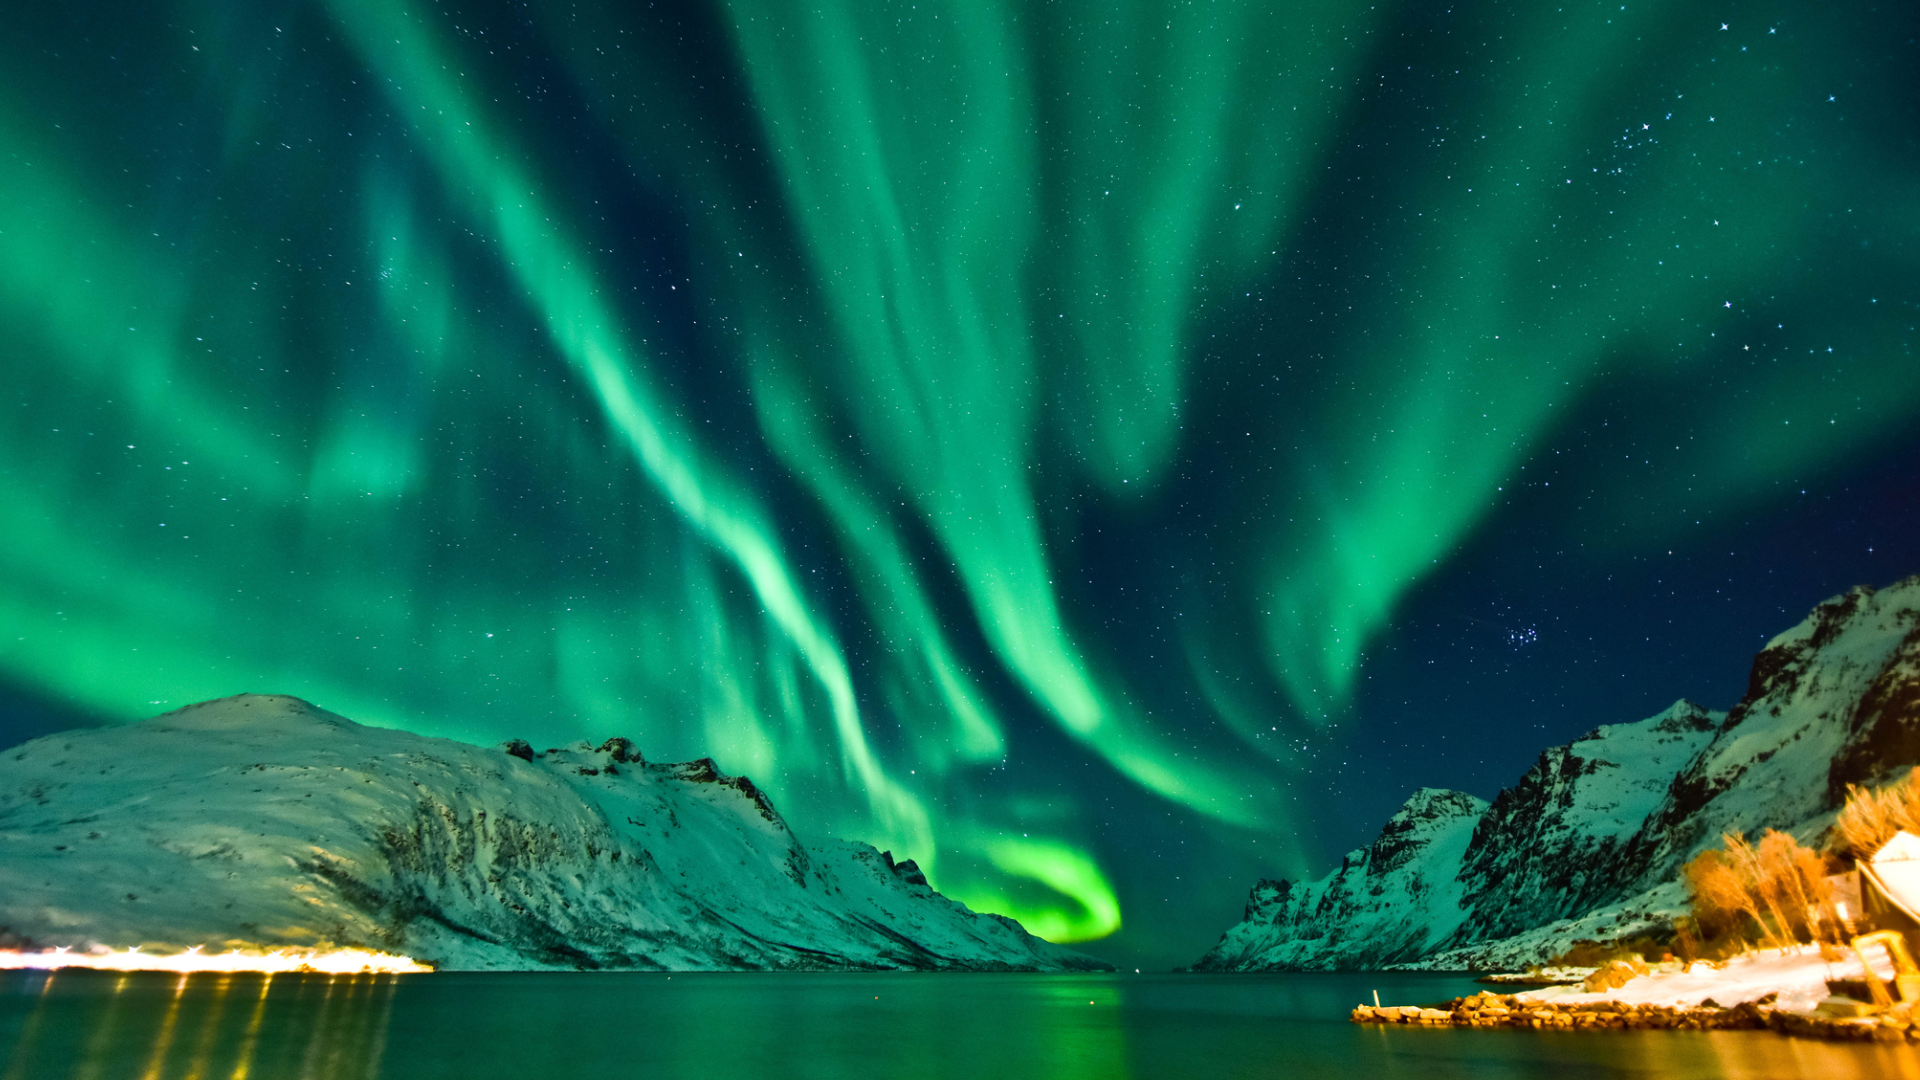 A trip of a lifetime puts you right in the middle of nature's magic. Cruise to the Northern Lights. Sponsored by AAA Travel